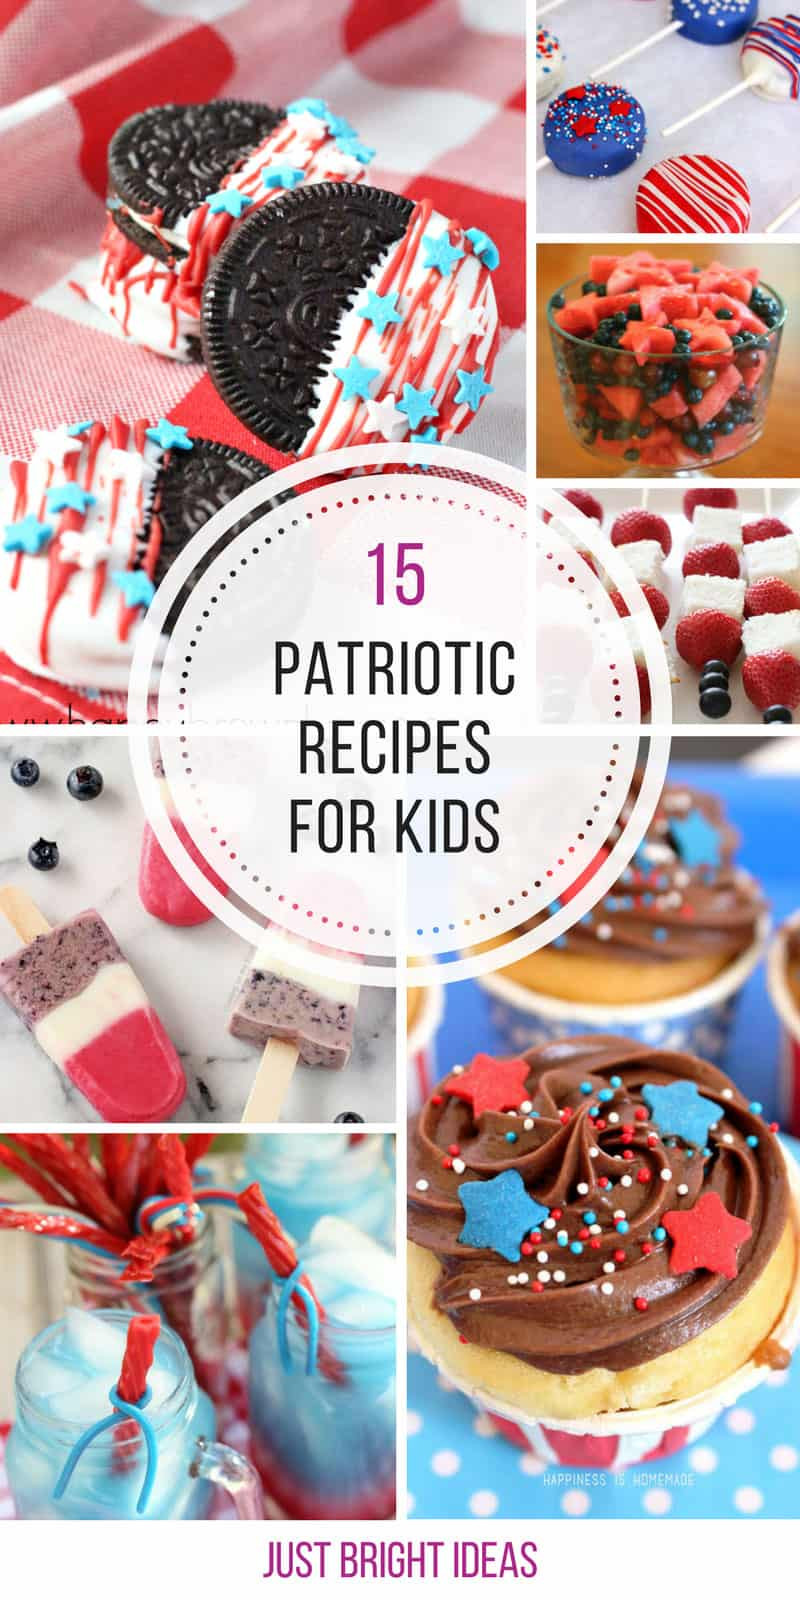 4Th Of July Recipes For Kids
 15 Fun 4th of July Recipes for Kids You Need to Make